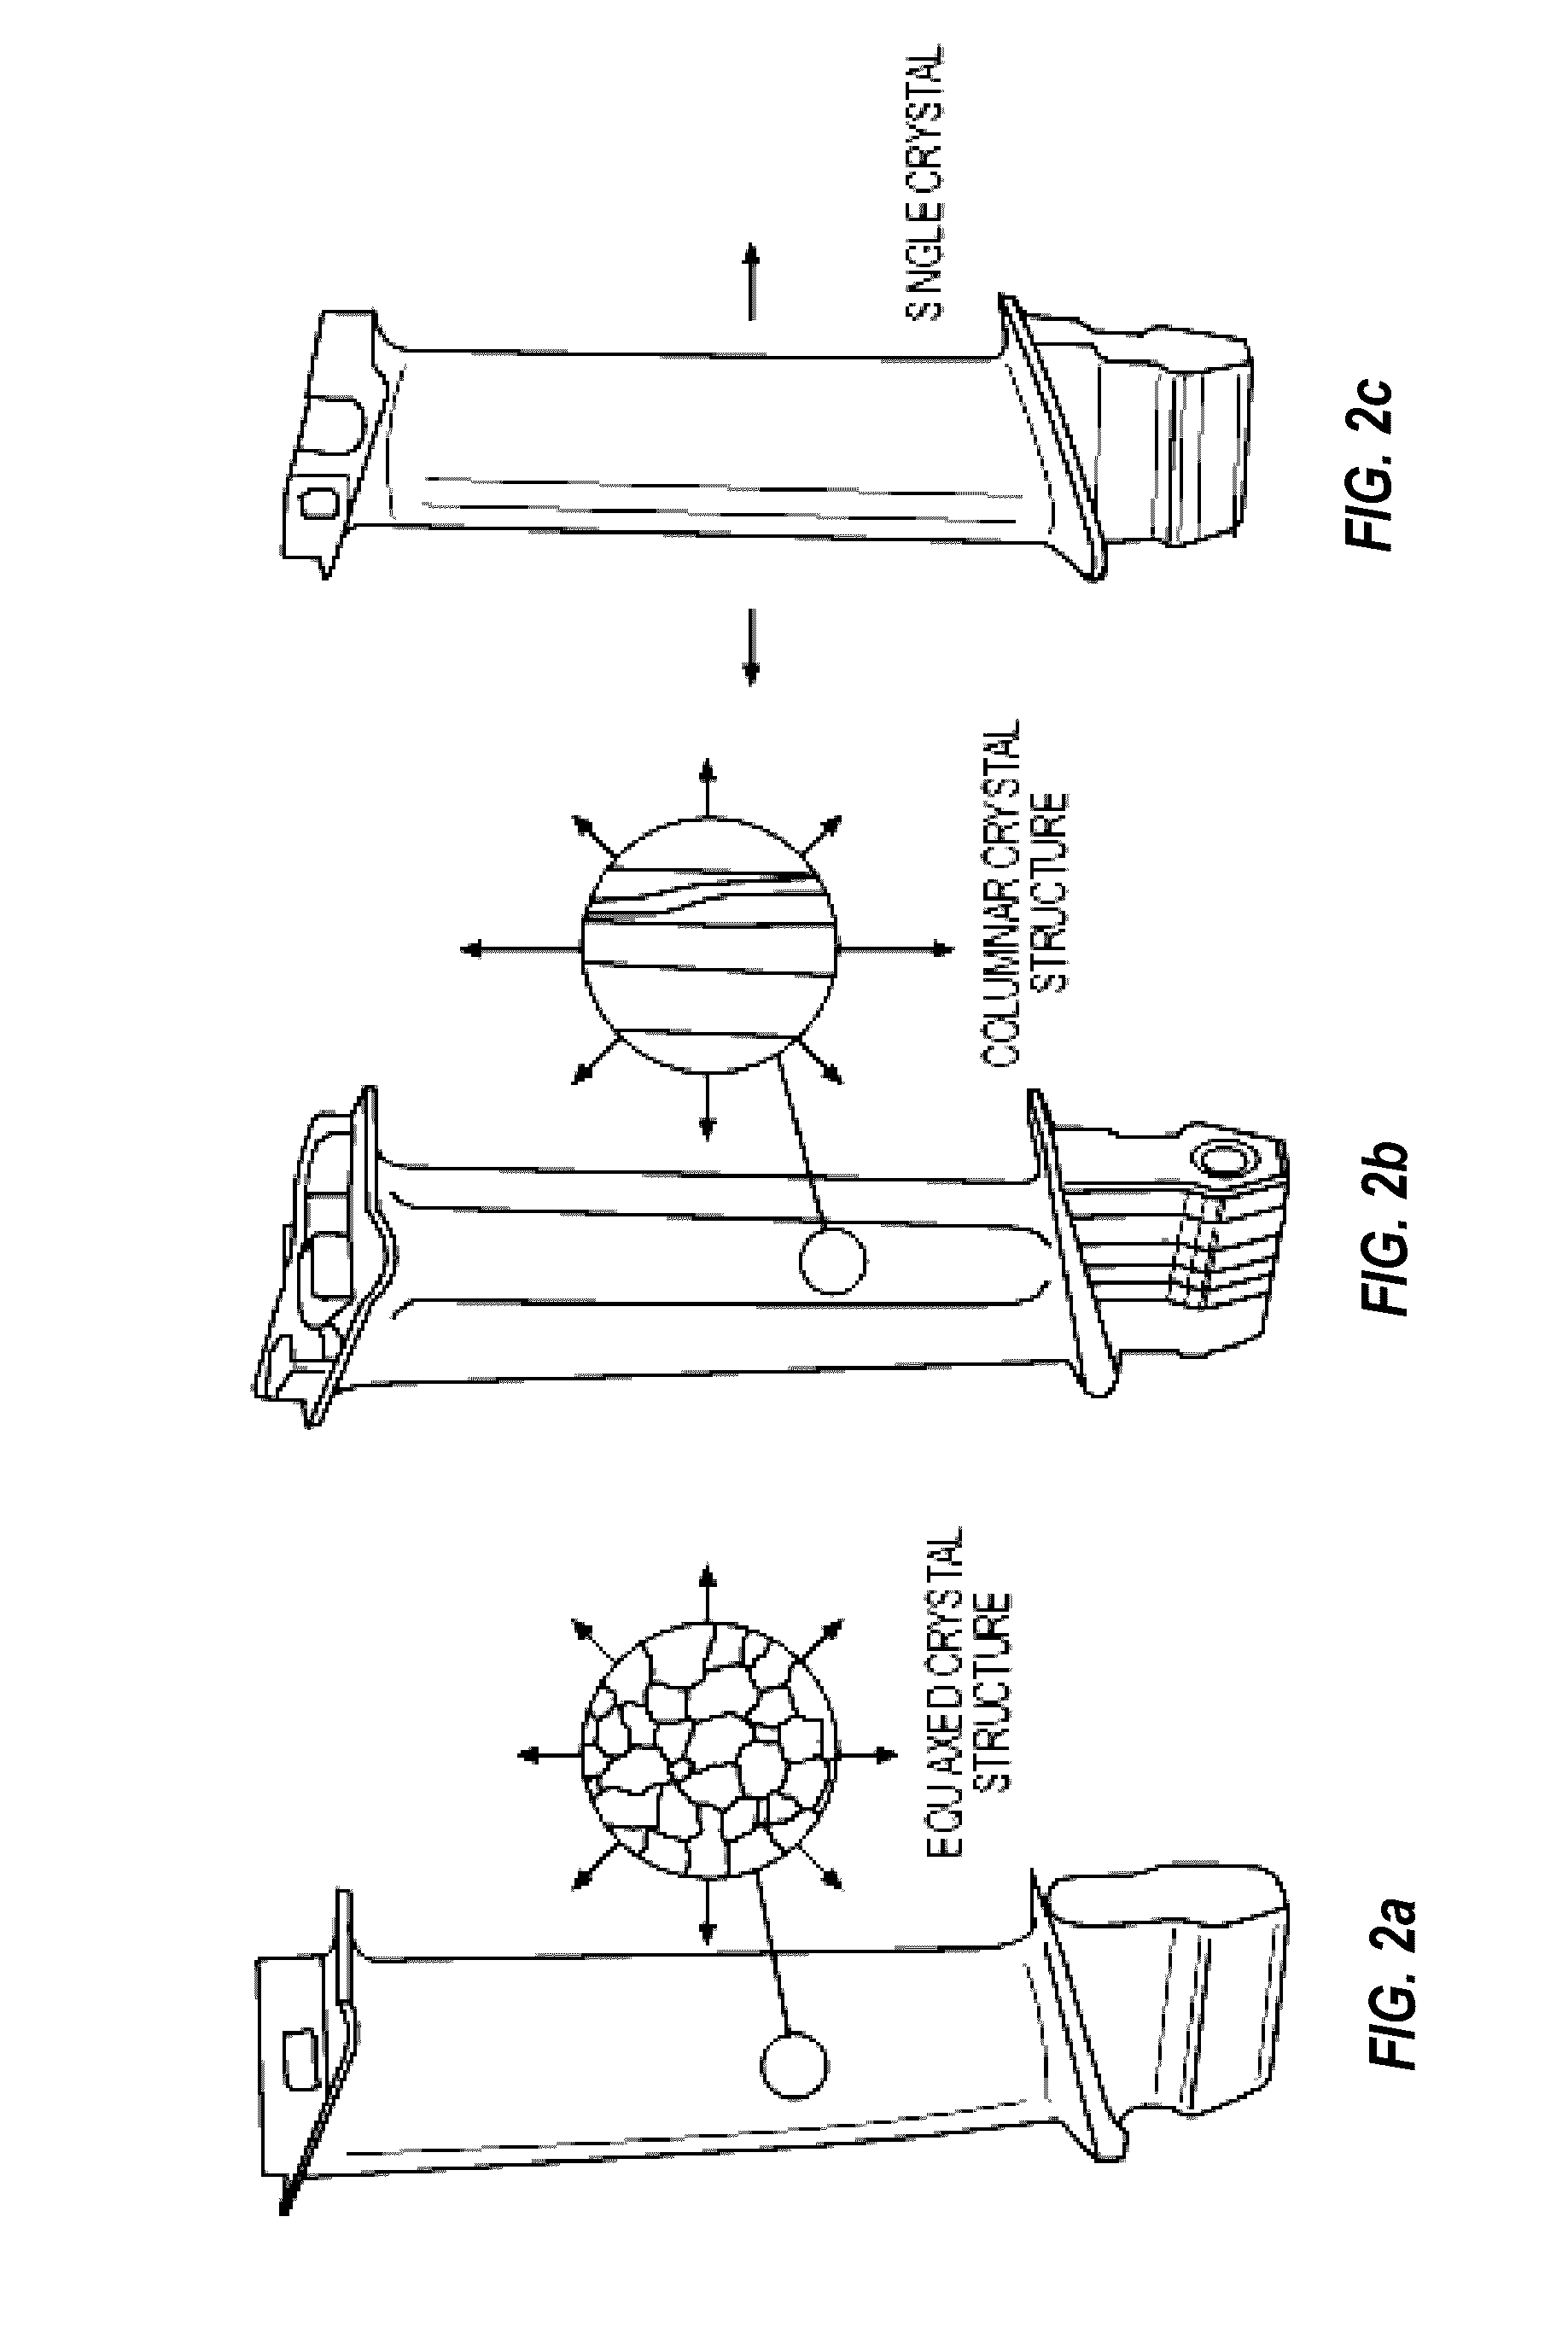 Systems and methods for additive manufacturing and repair of metal components